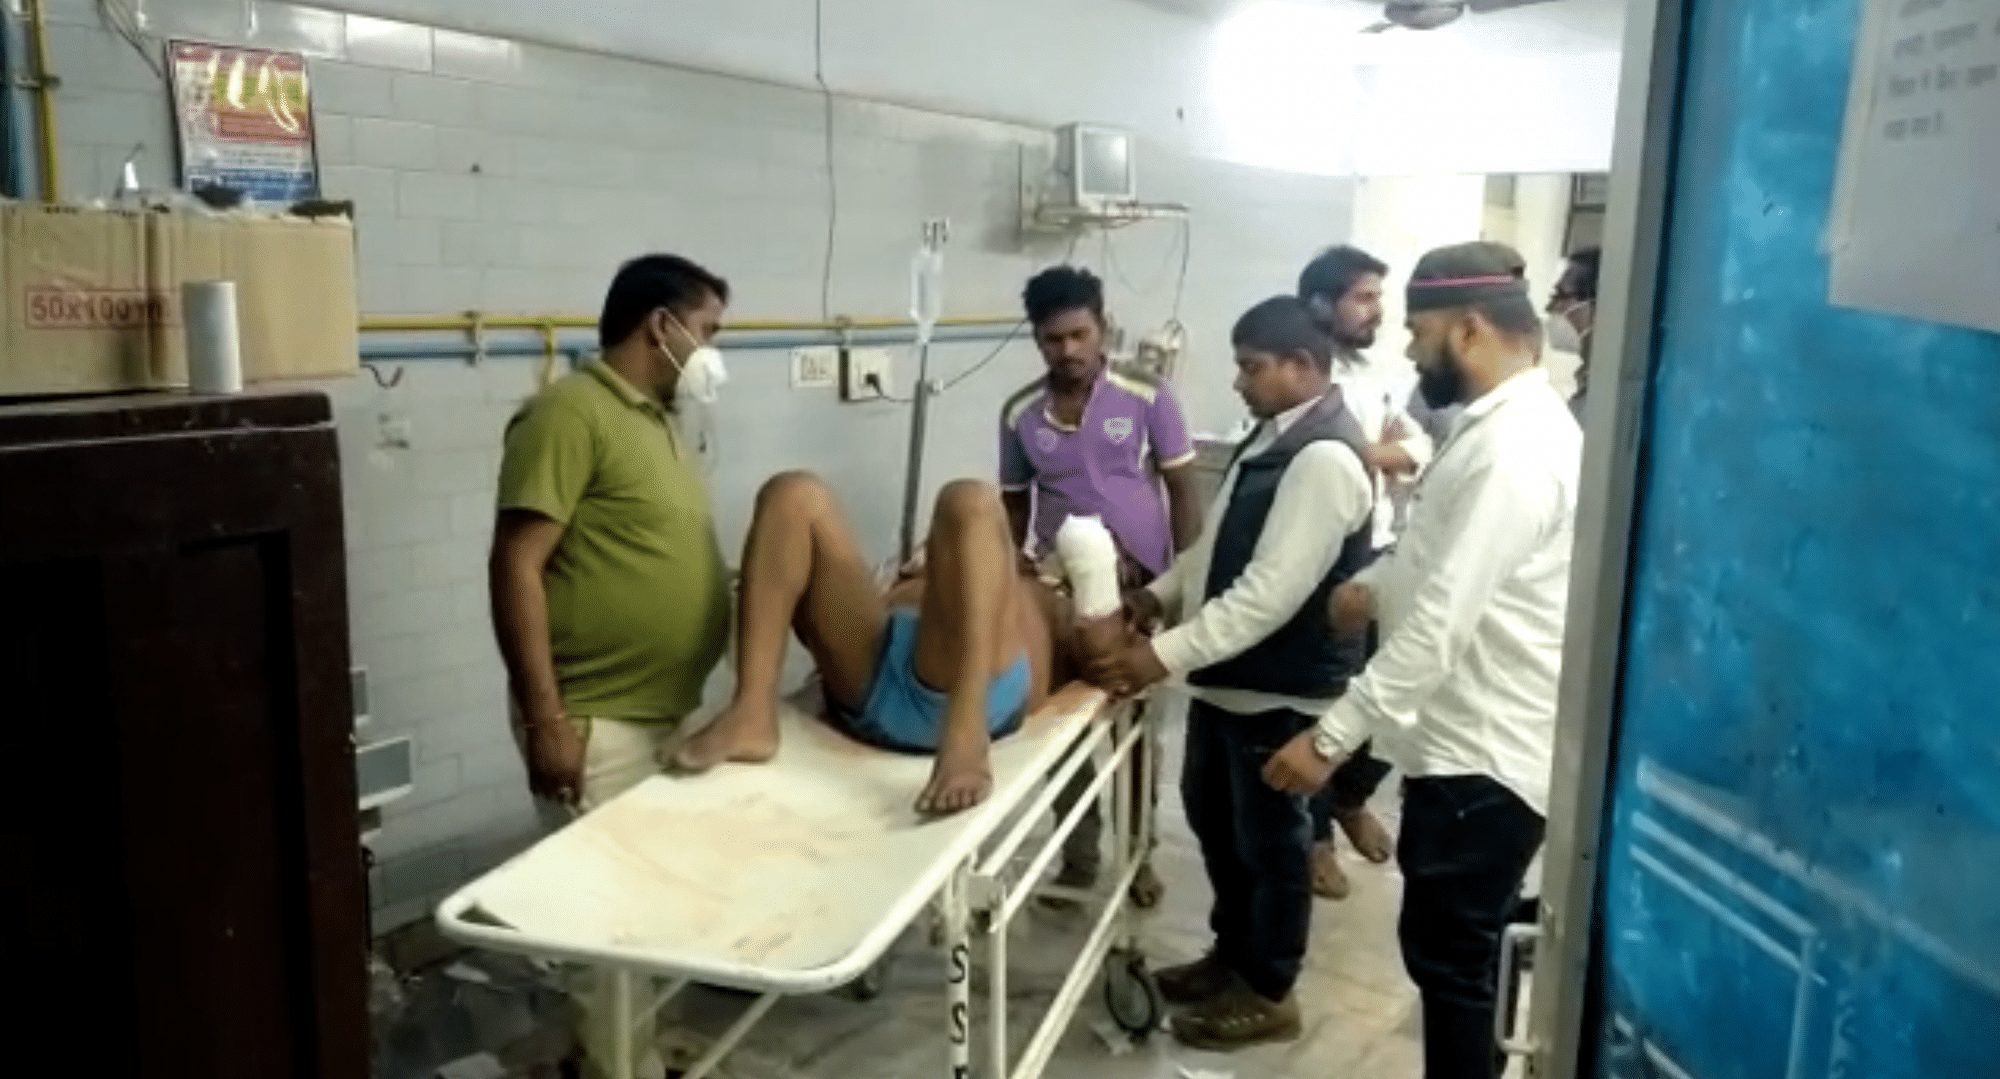 <div class="paragraphs"><p>In a shocking incident from Madhya Pradesh’s Rewa district, a labourer’s hand was cut off by his employer when he demanded his wages, on Sunday, 21 November.</p></div>